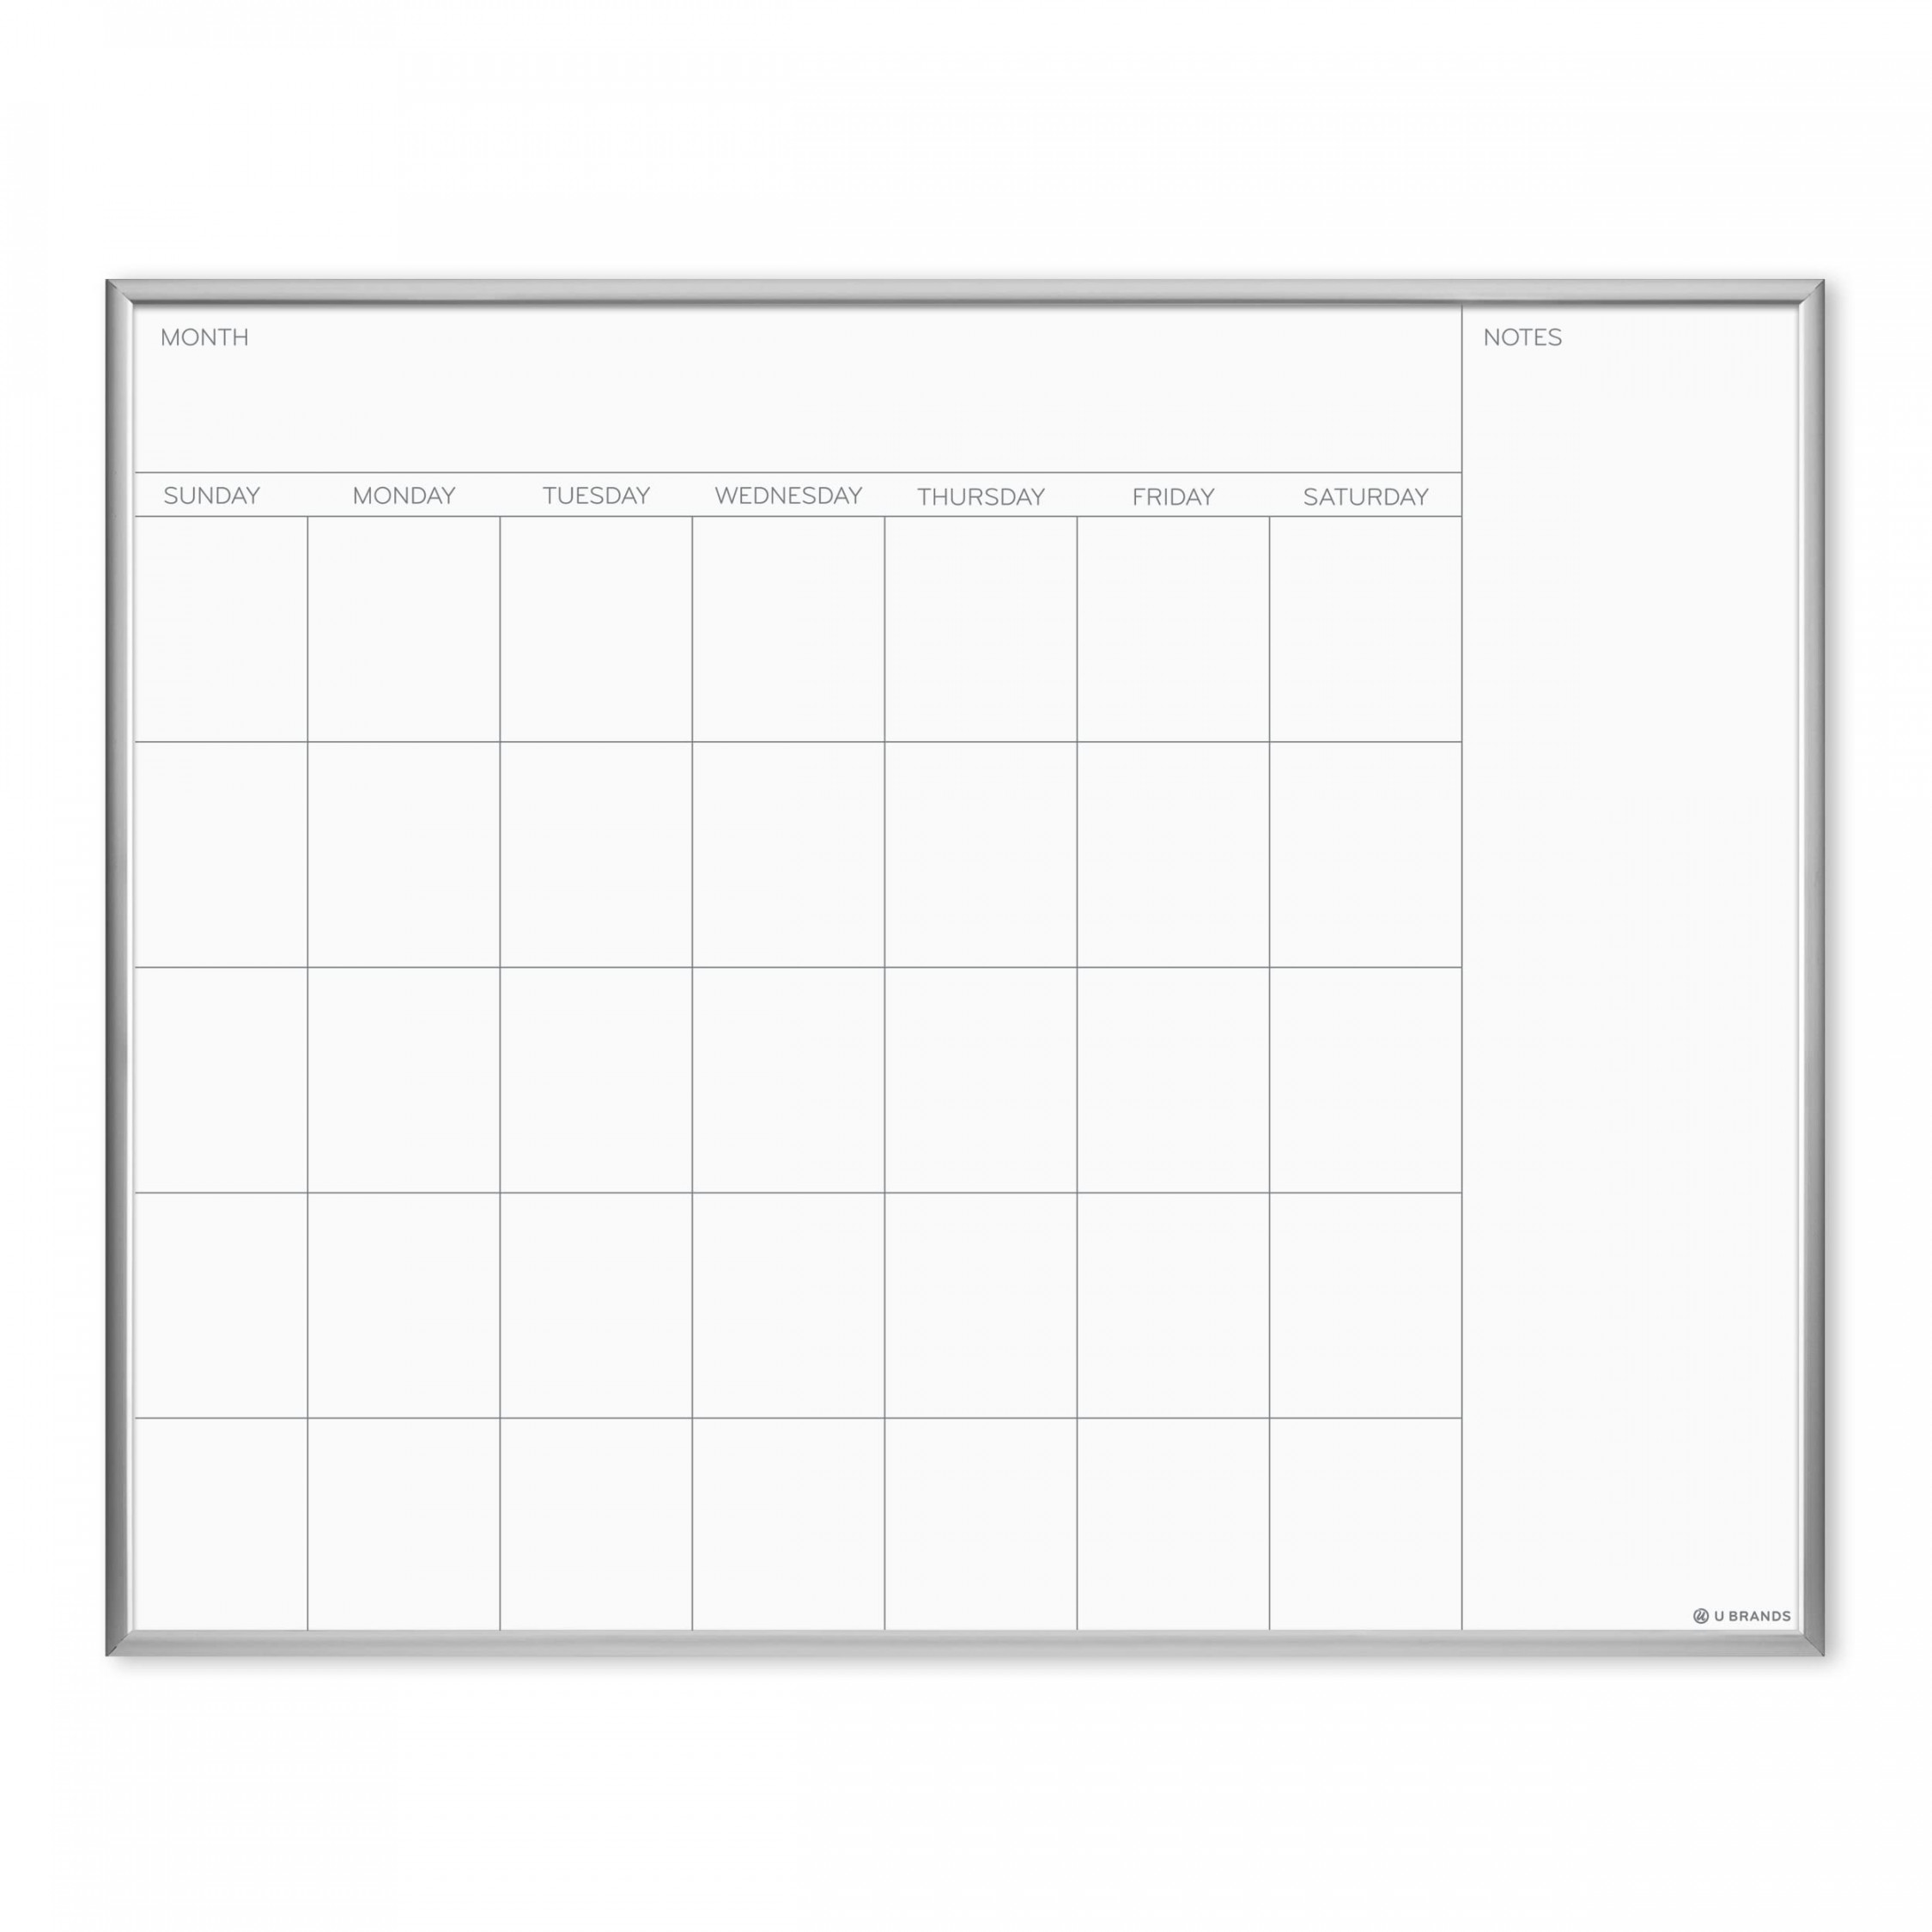 U Brands Magnetic Monthly Calendar Dry Erase Board, x Inches, Silver Aluminum Frame, Magnet anSee more U Brands Magnetic Monthly Calendar Dry